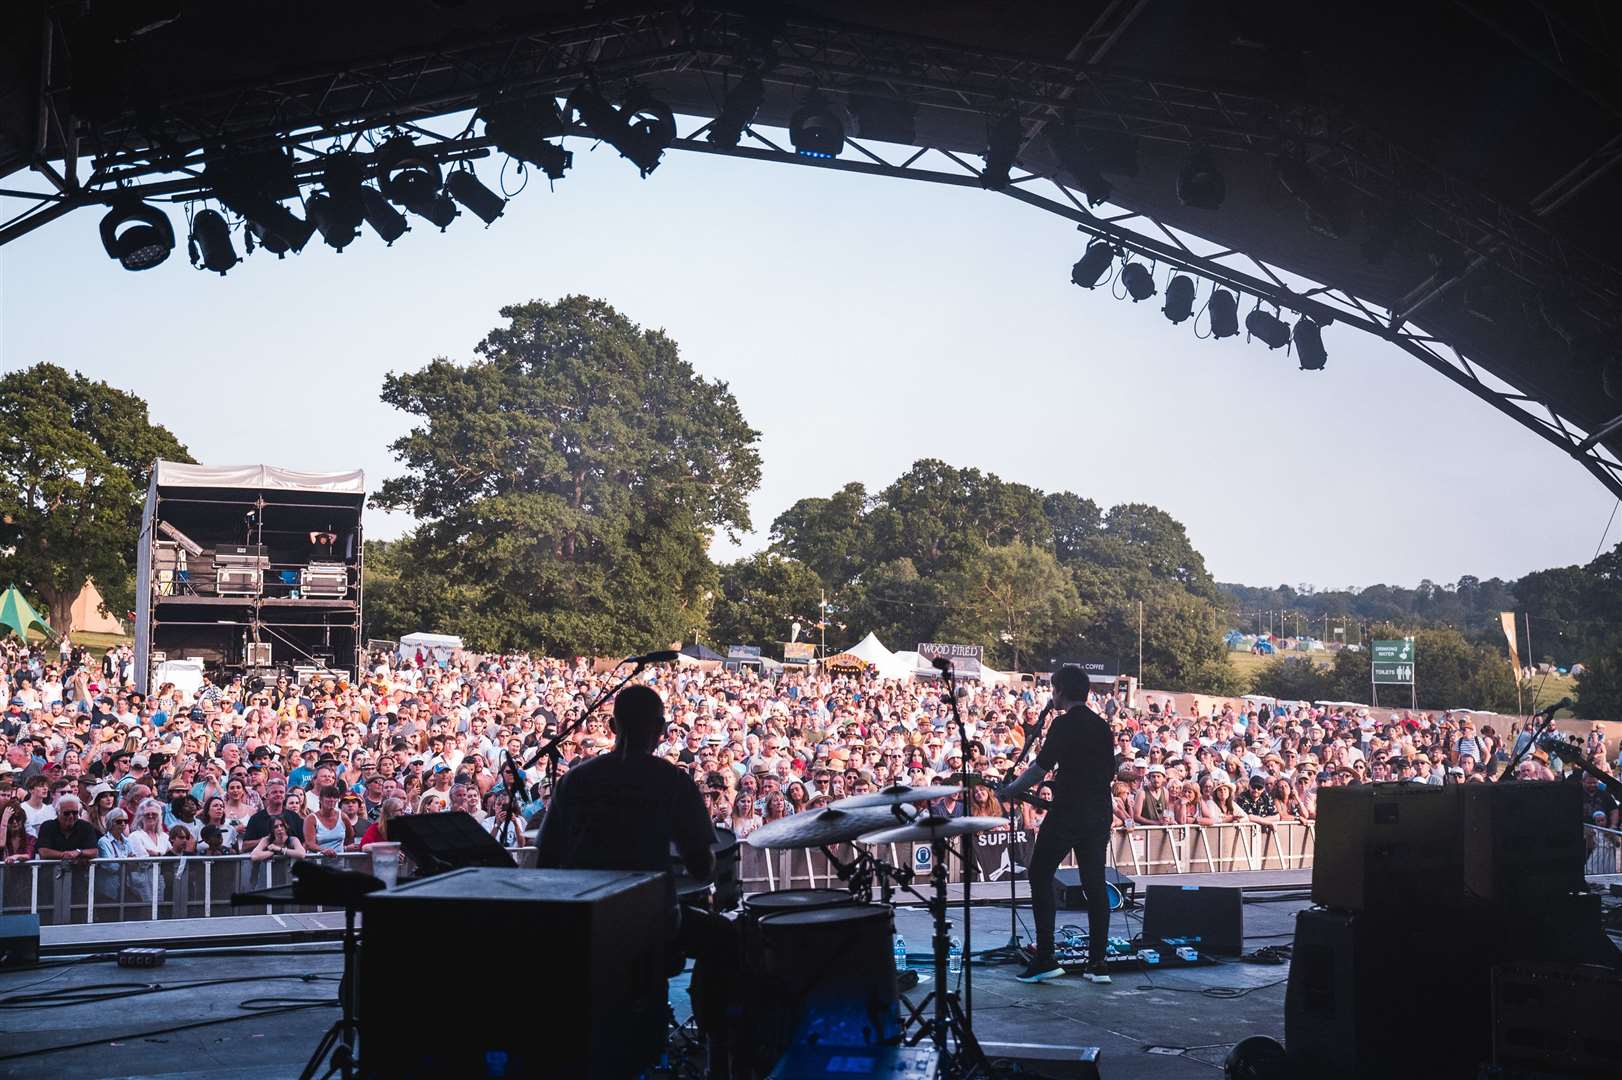 The Black Deer Festival proved a success earlier this summer - with patient ticket holders waiting two years for the show following the pandemic